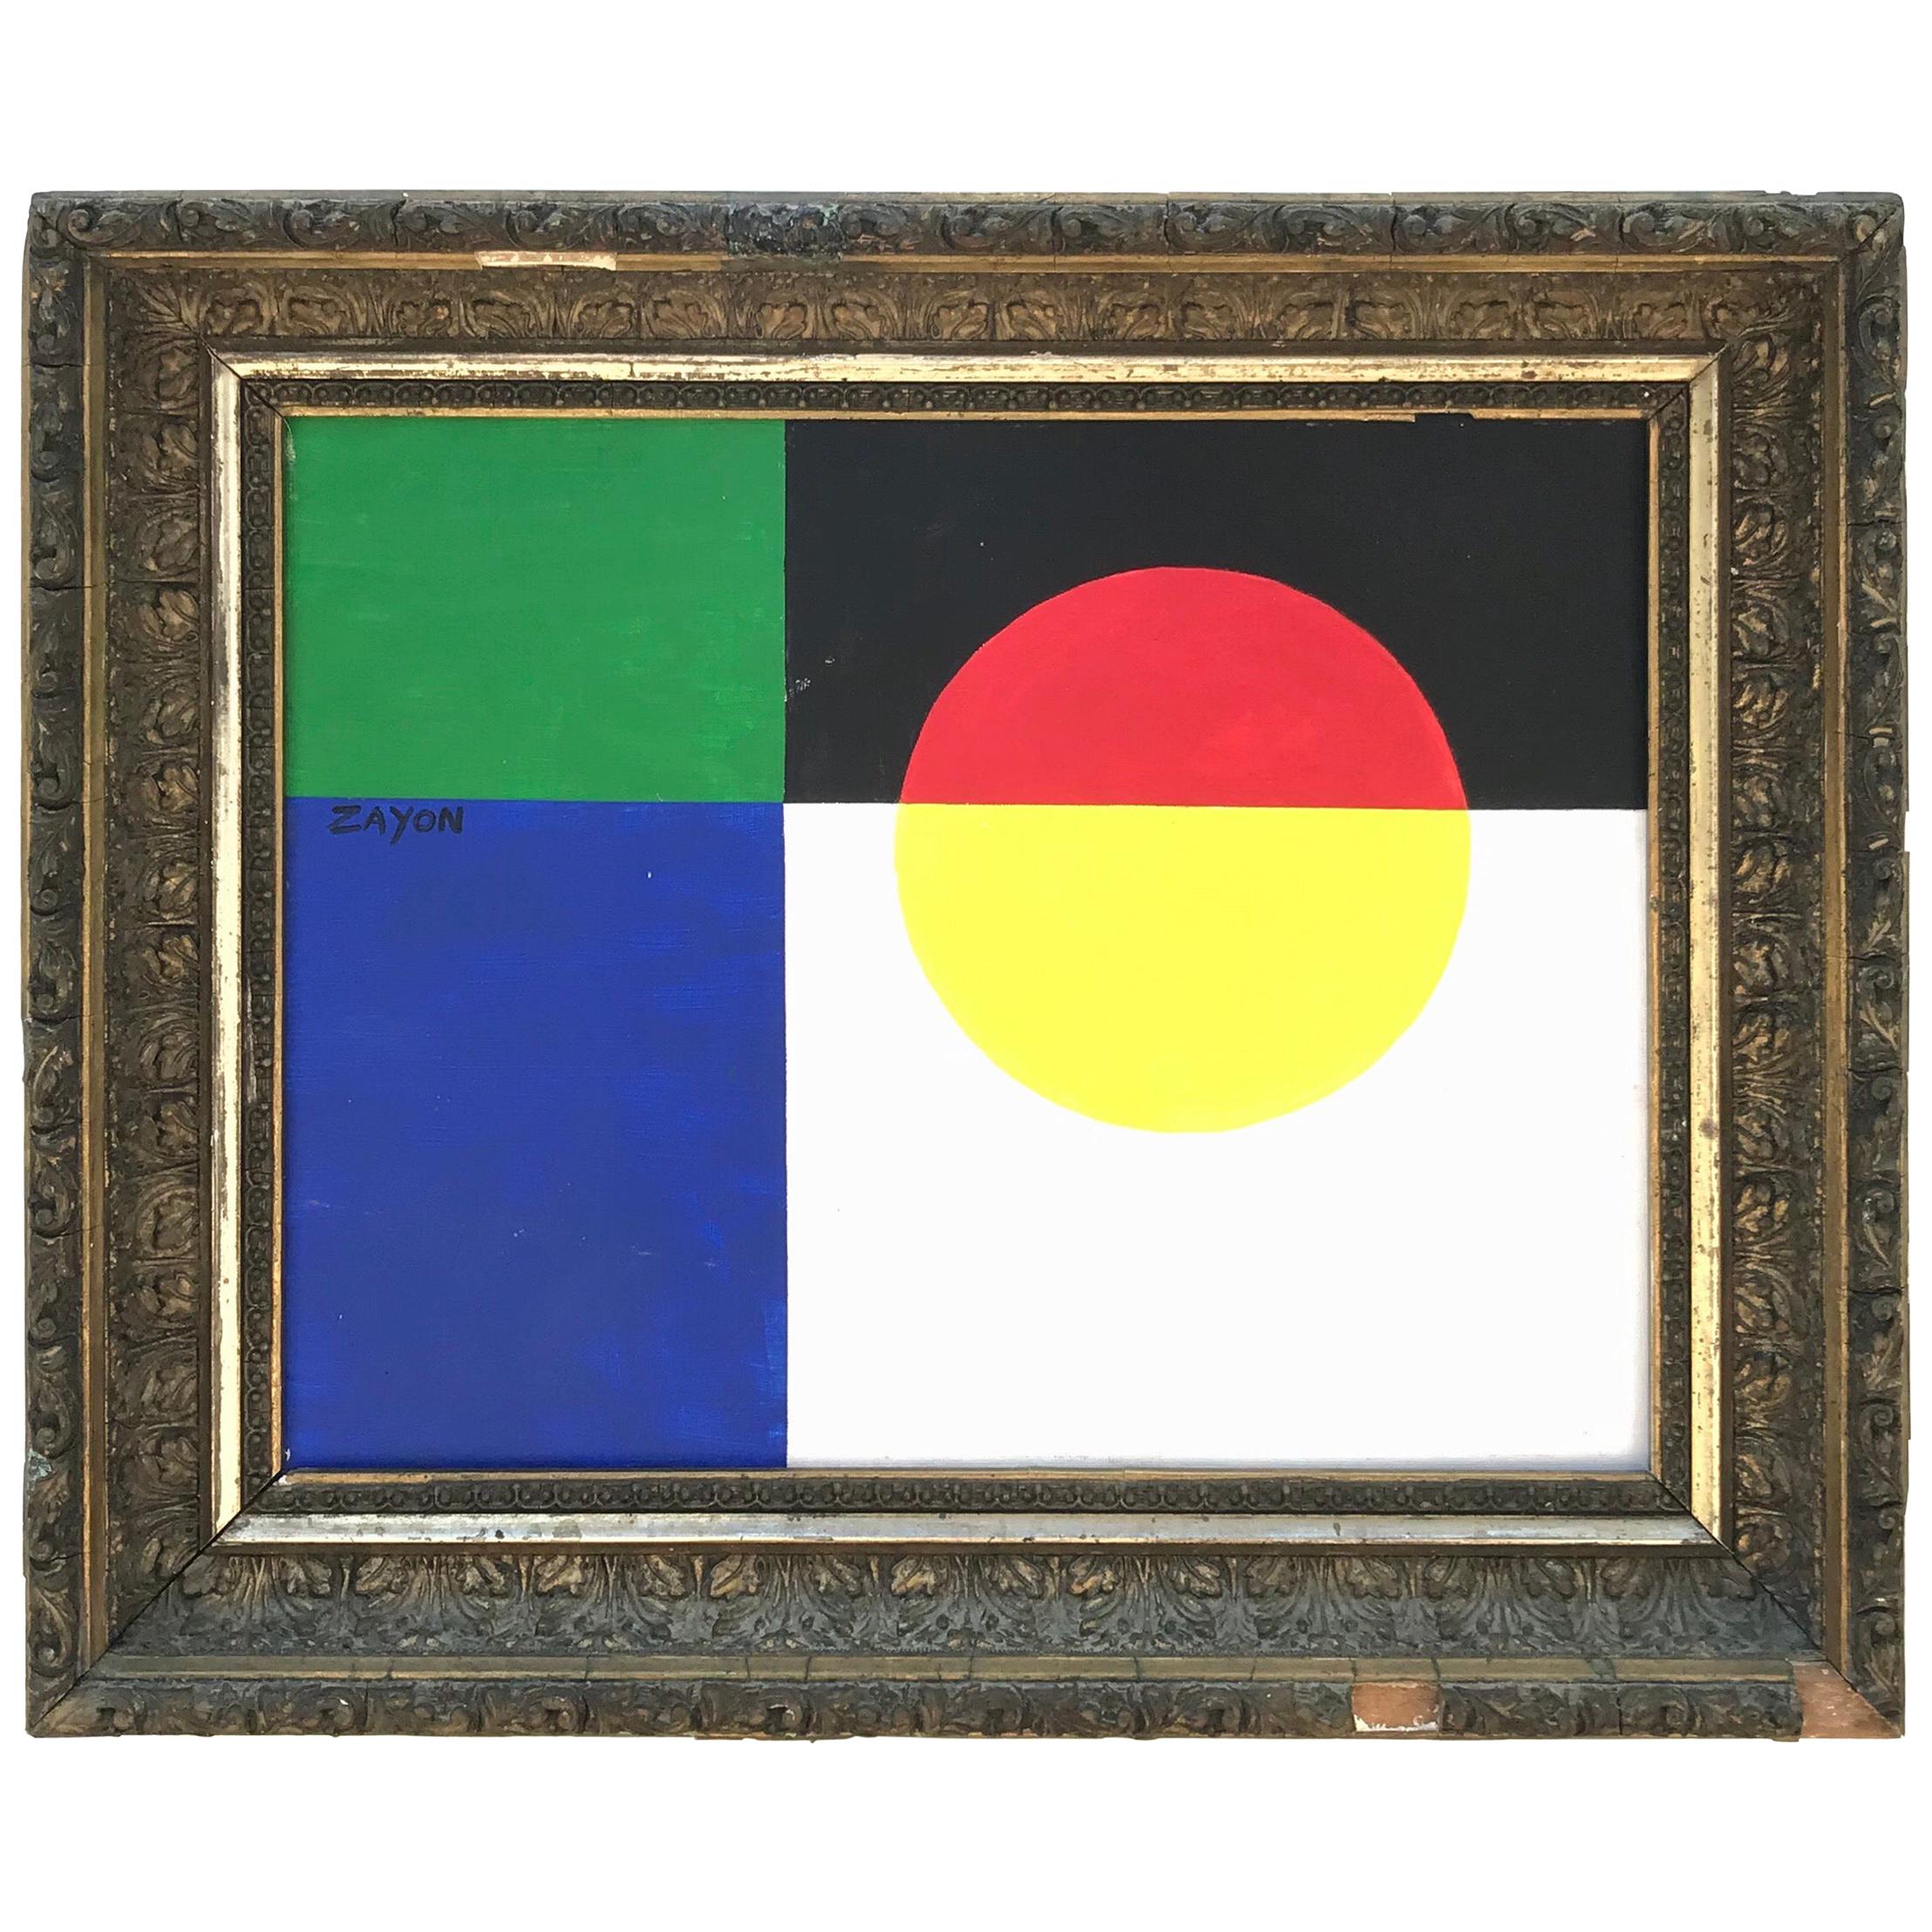 Modernist Color Block Abstract Painting by Seymour Zayon For Sale